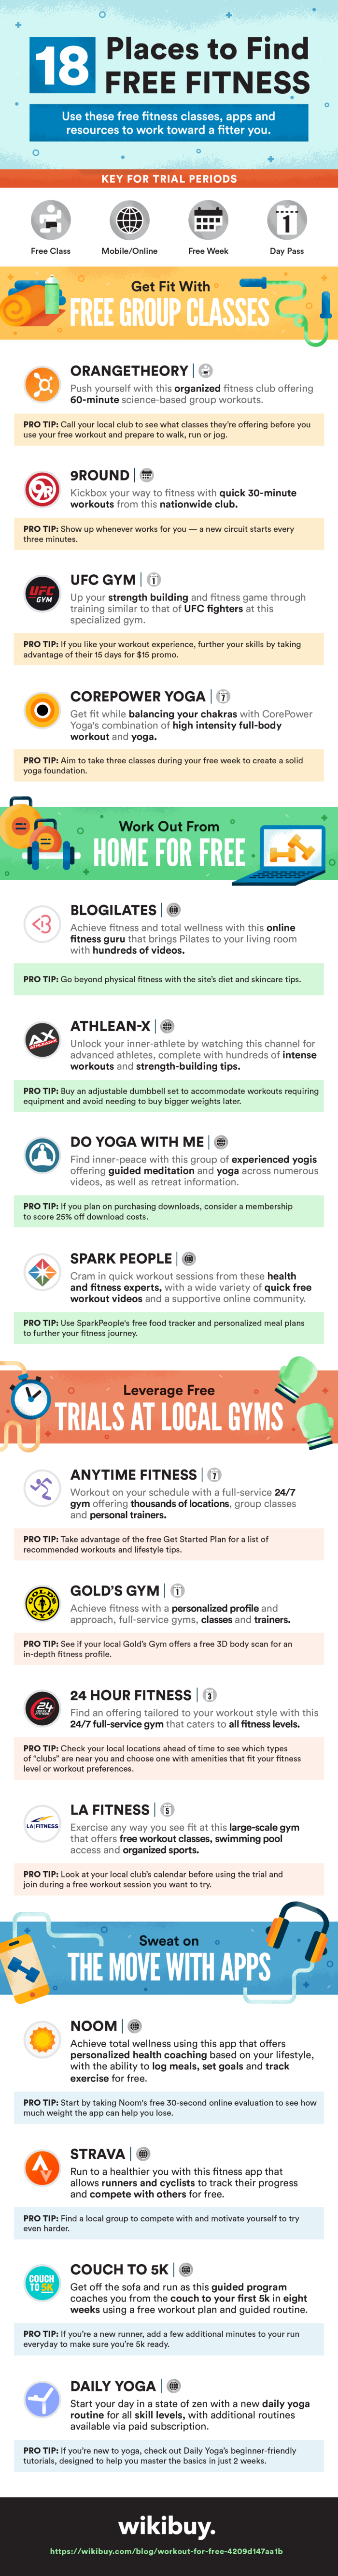  18 Fit and Fabulous Sources For Free or Cheap Workouts - Trying to save money on fitness? There are many classes, trial gyms, online workouts, and free fitness apps that you can choose from. #workouts #freeworkouts  #workoutapps  #cheapworkouts  #onlineworkouts  #freefitness apps  